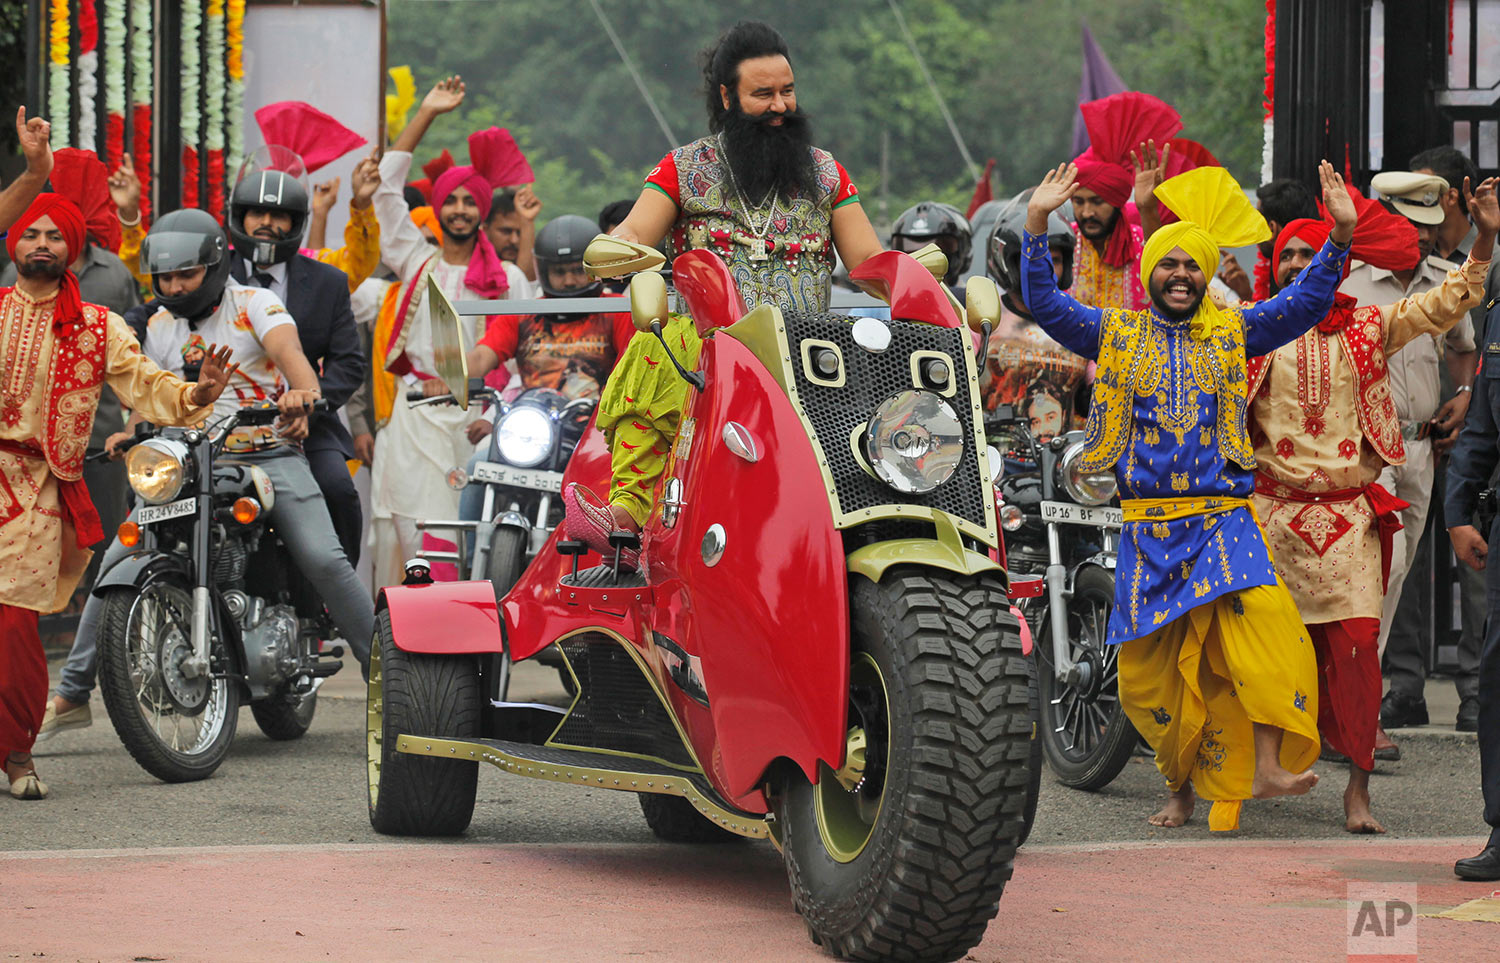  In this Wednesday, Oct. 5, 2016 photo, Indian spiritual guru, who calls himself Dr. Saint Gurmeet Singh Ram Rahim Insan, rides a motorcycle as he arrives for a press conference ahead of the release of his new film "MSG: The Warrior Lion Heart," in N